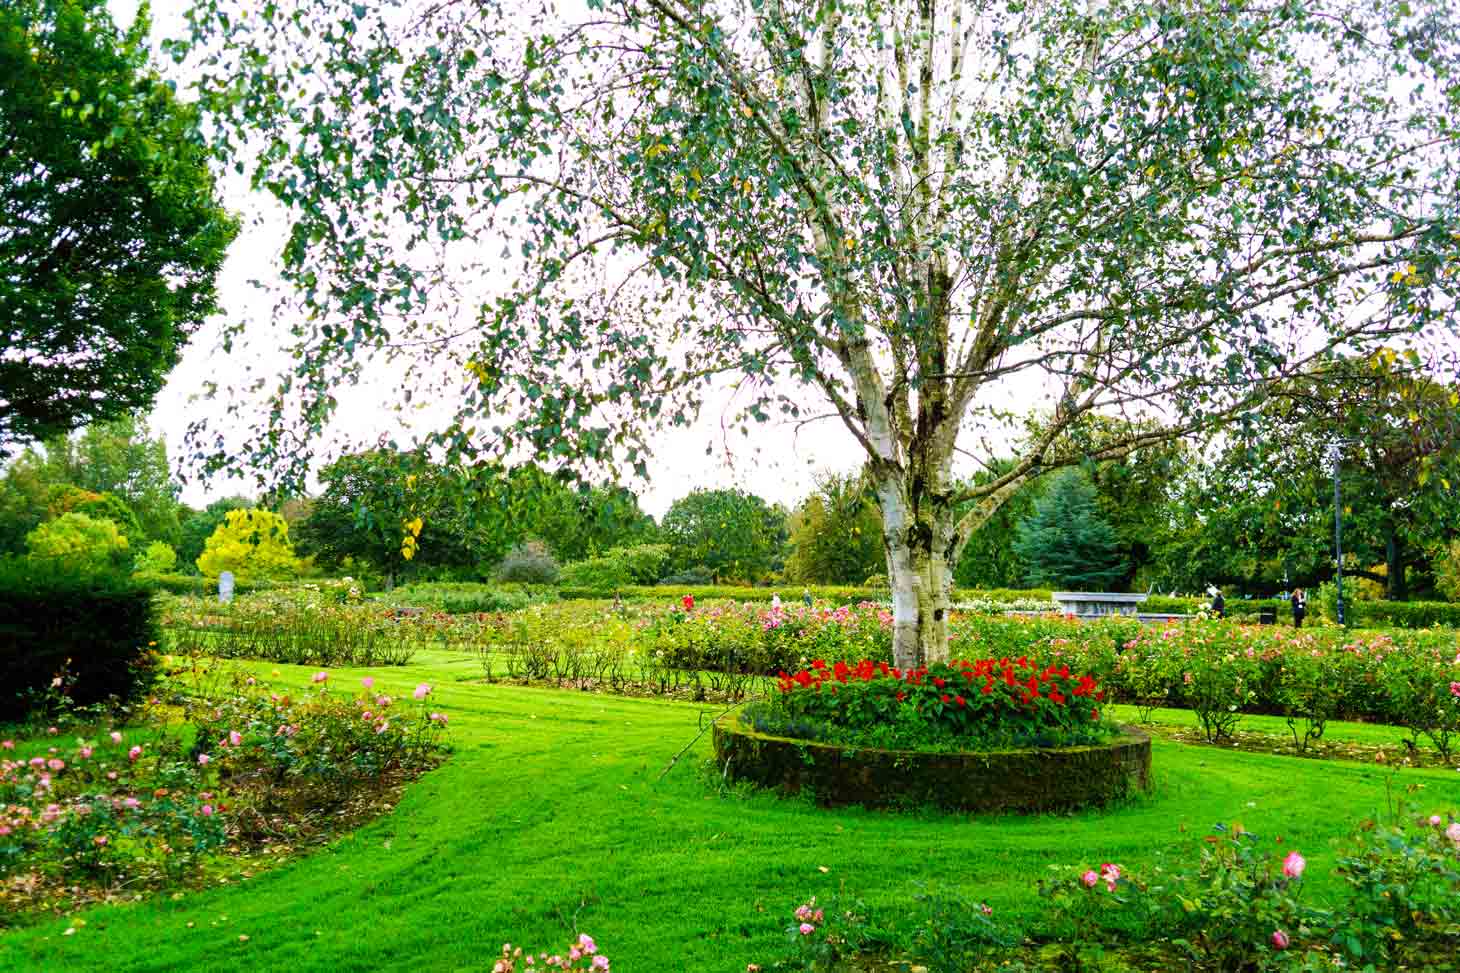 The Green is what locals call the Tralee Town Park home to a beautiful rose garden